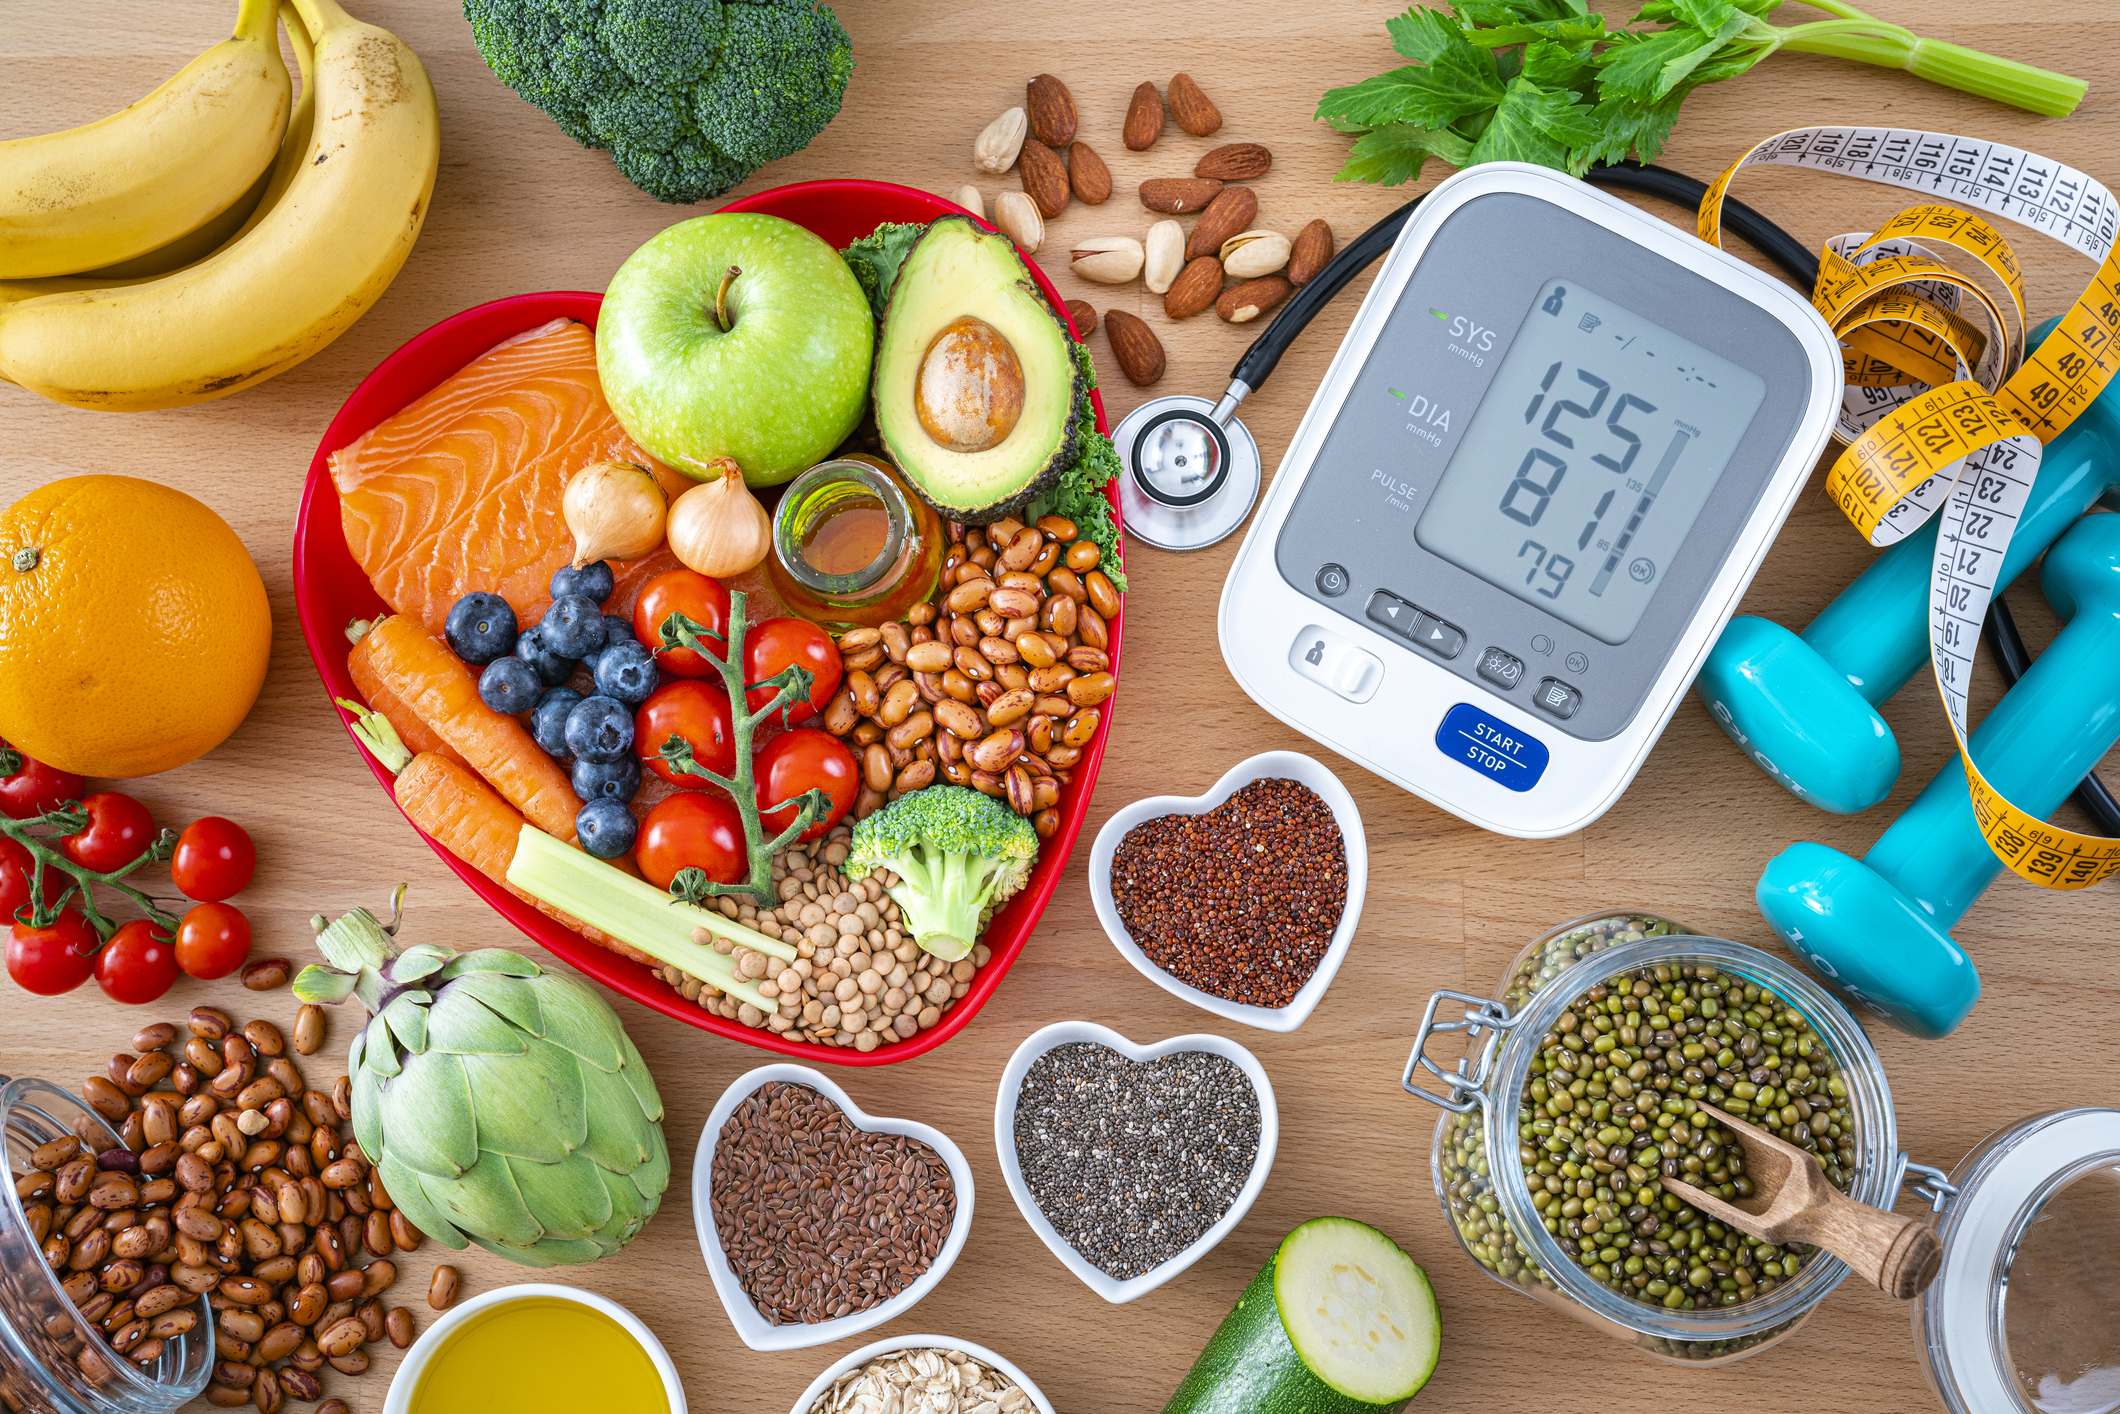 Fresh foods and blood pressure monitor